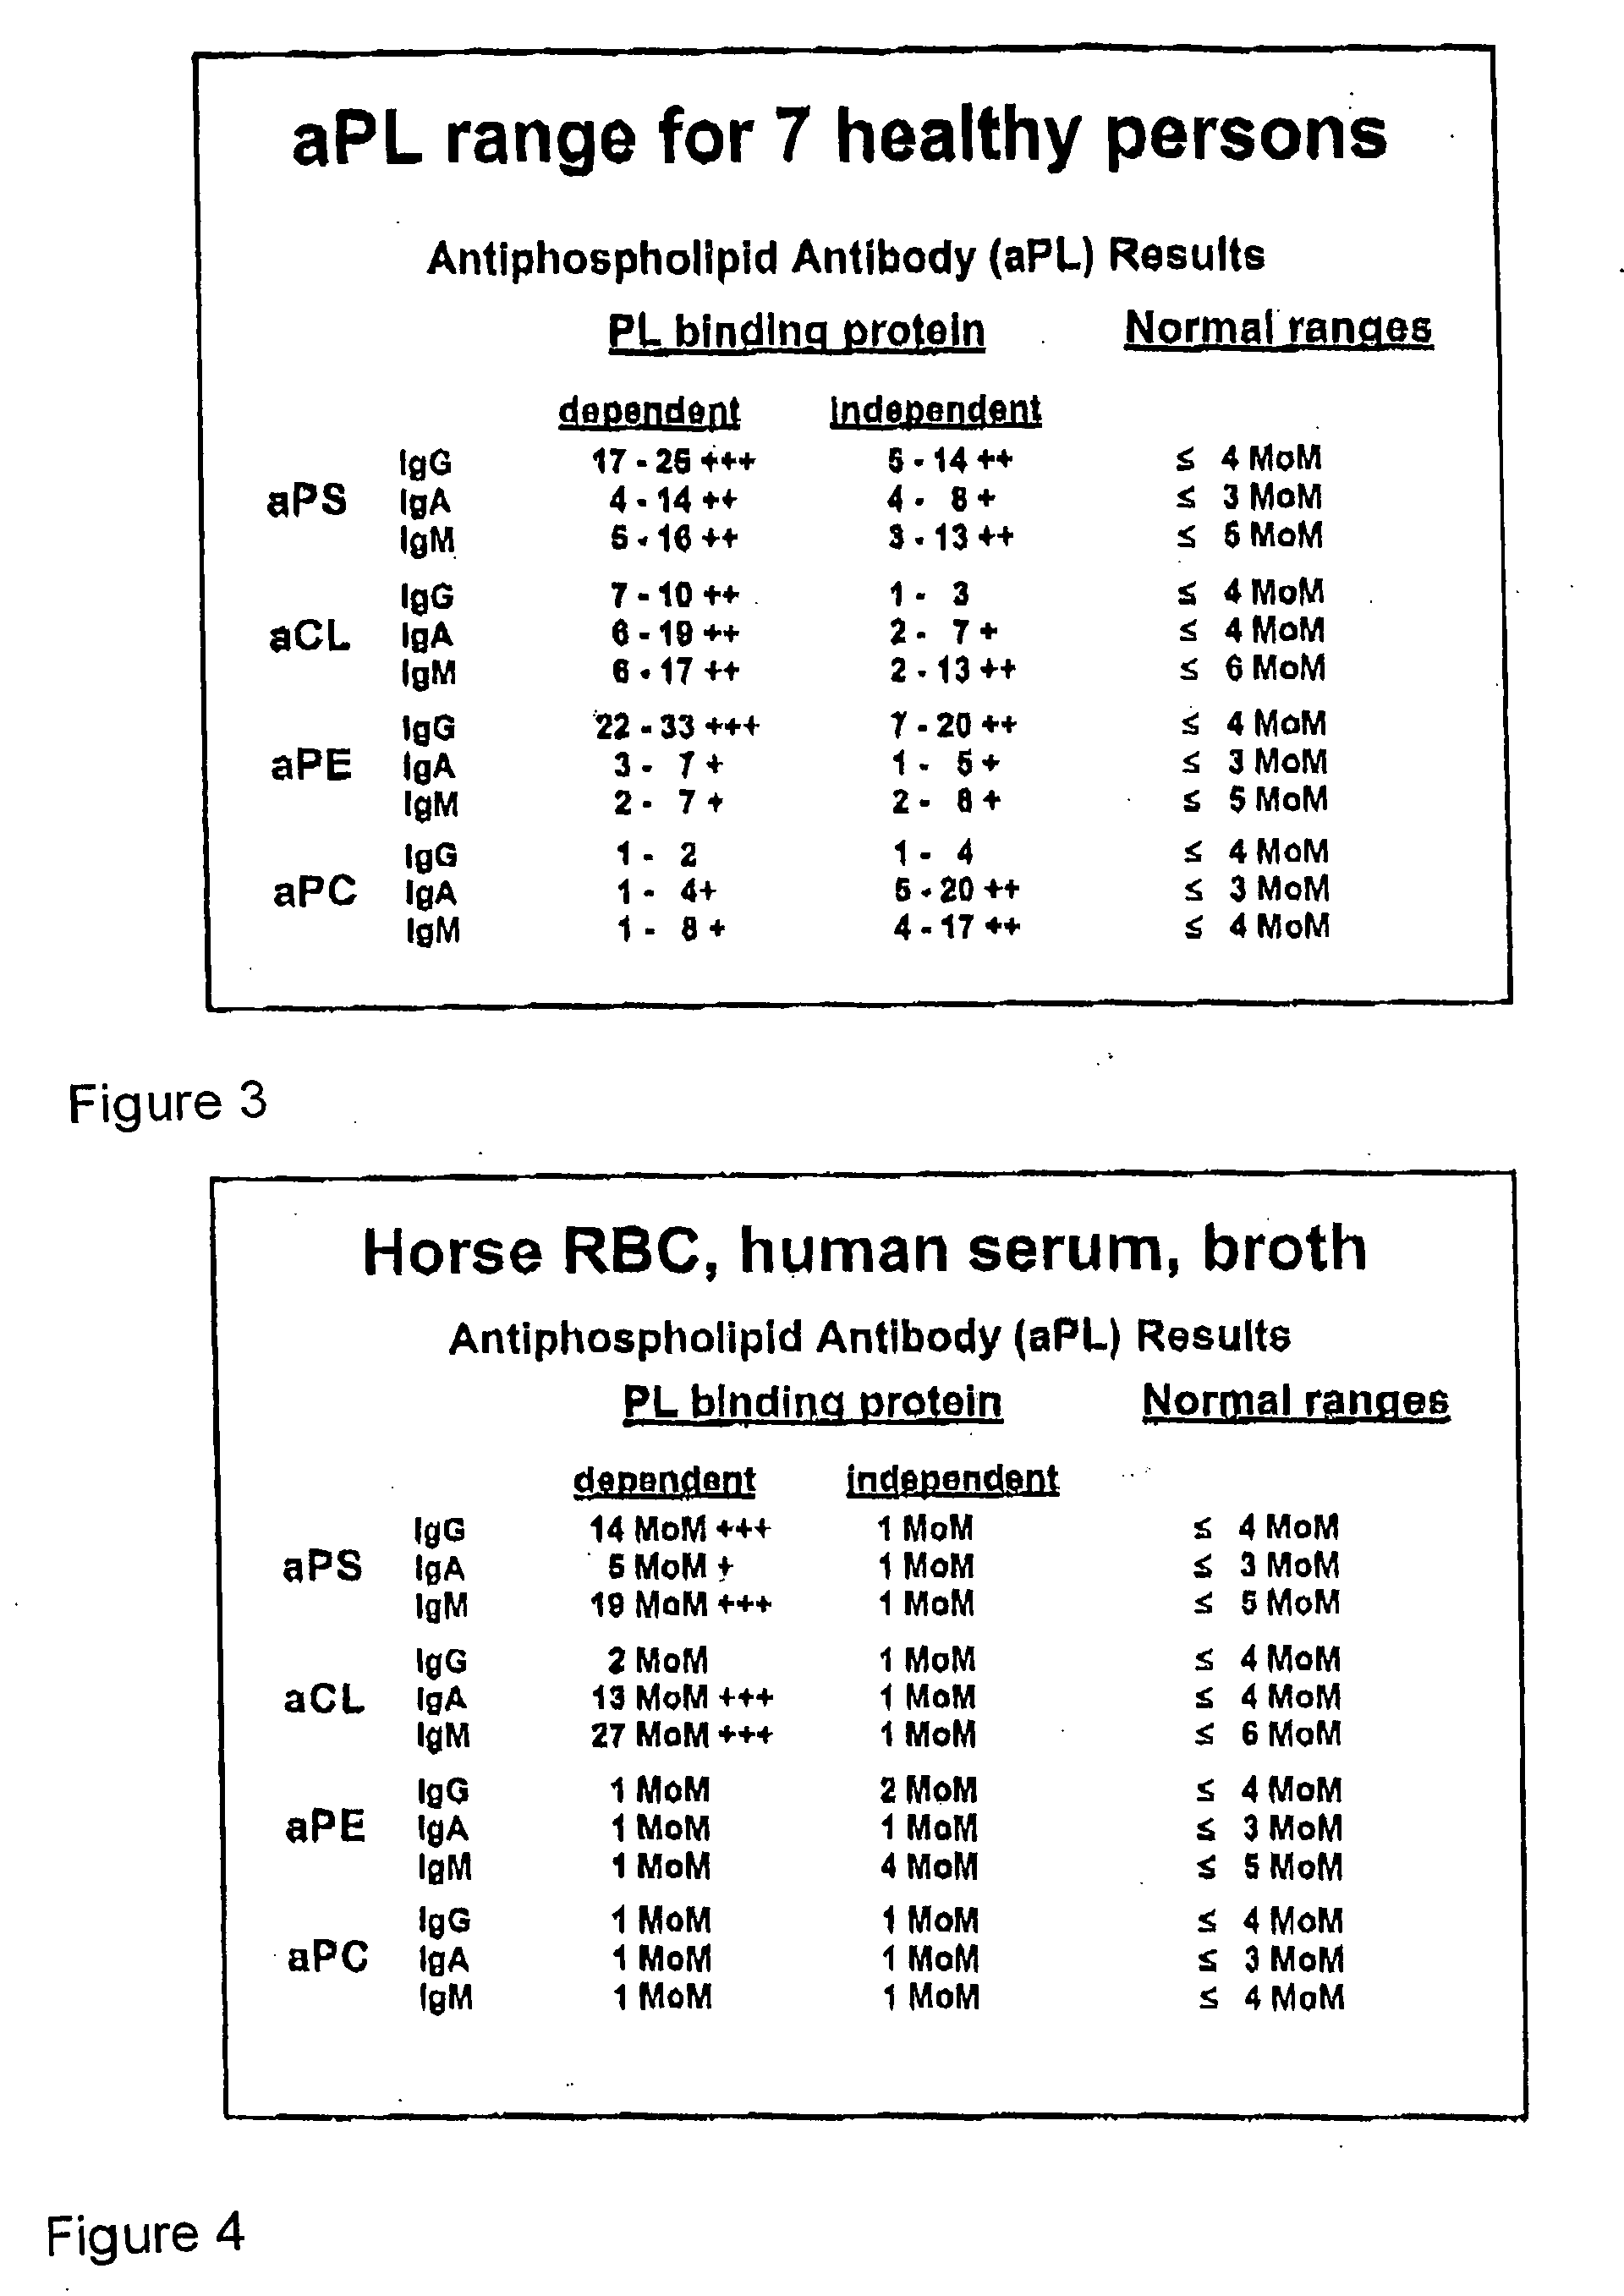 Method of altering the binding specificity of proteins by oxidation-reduction reactions